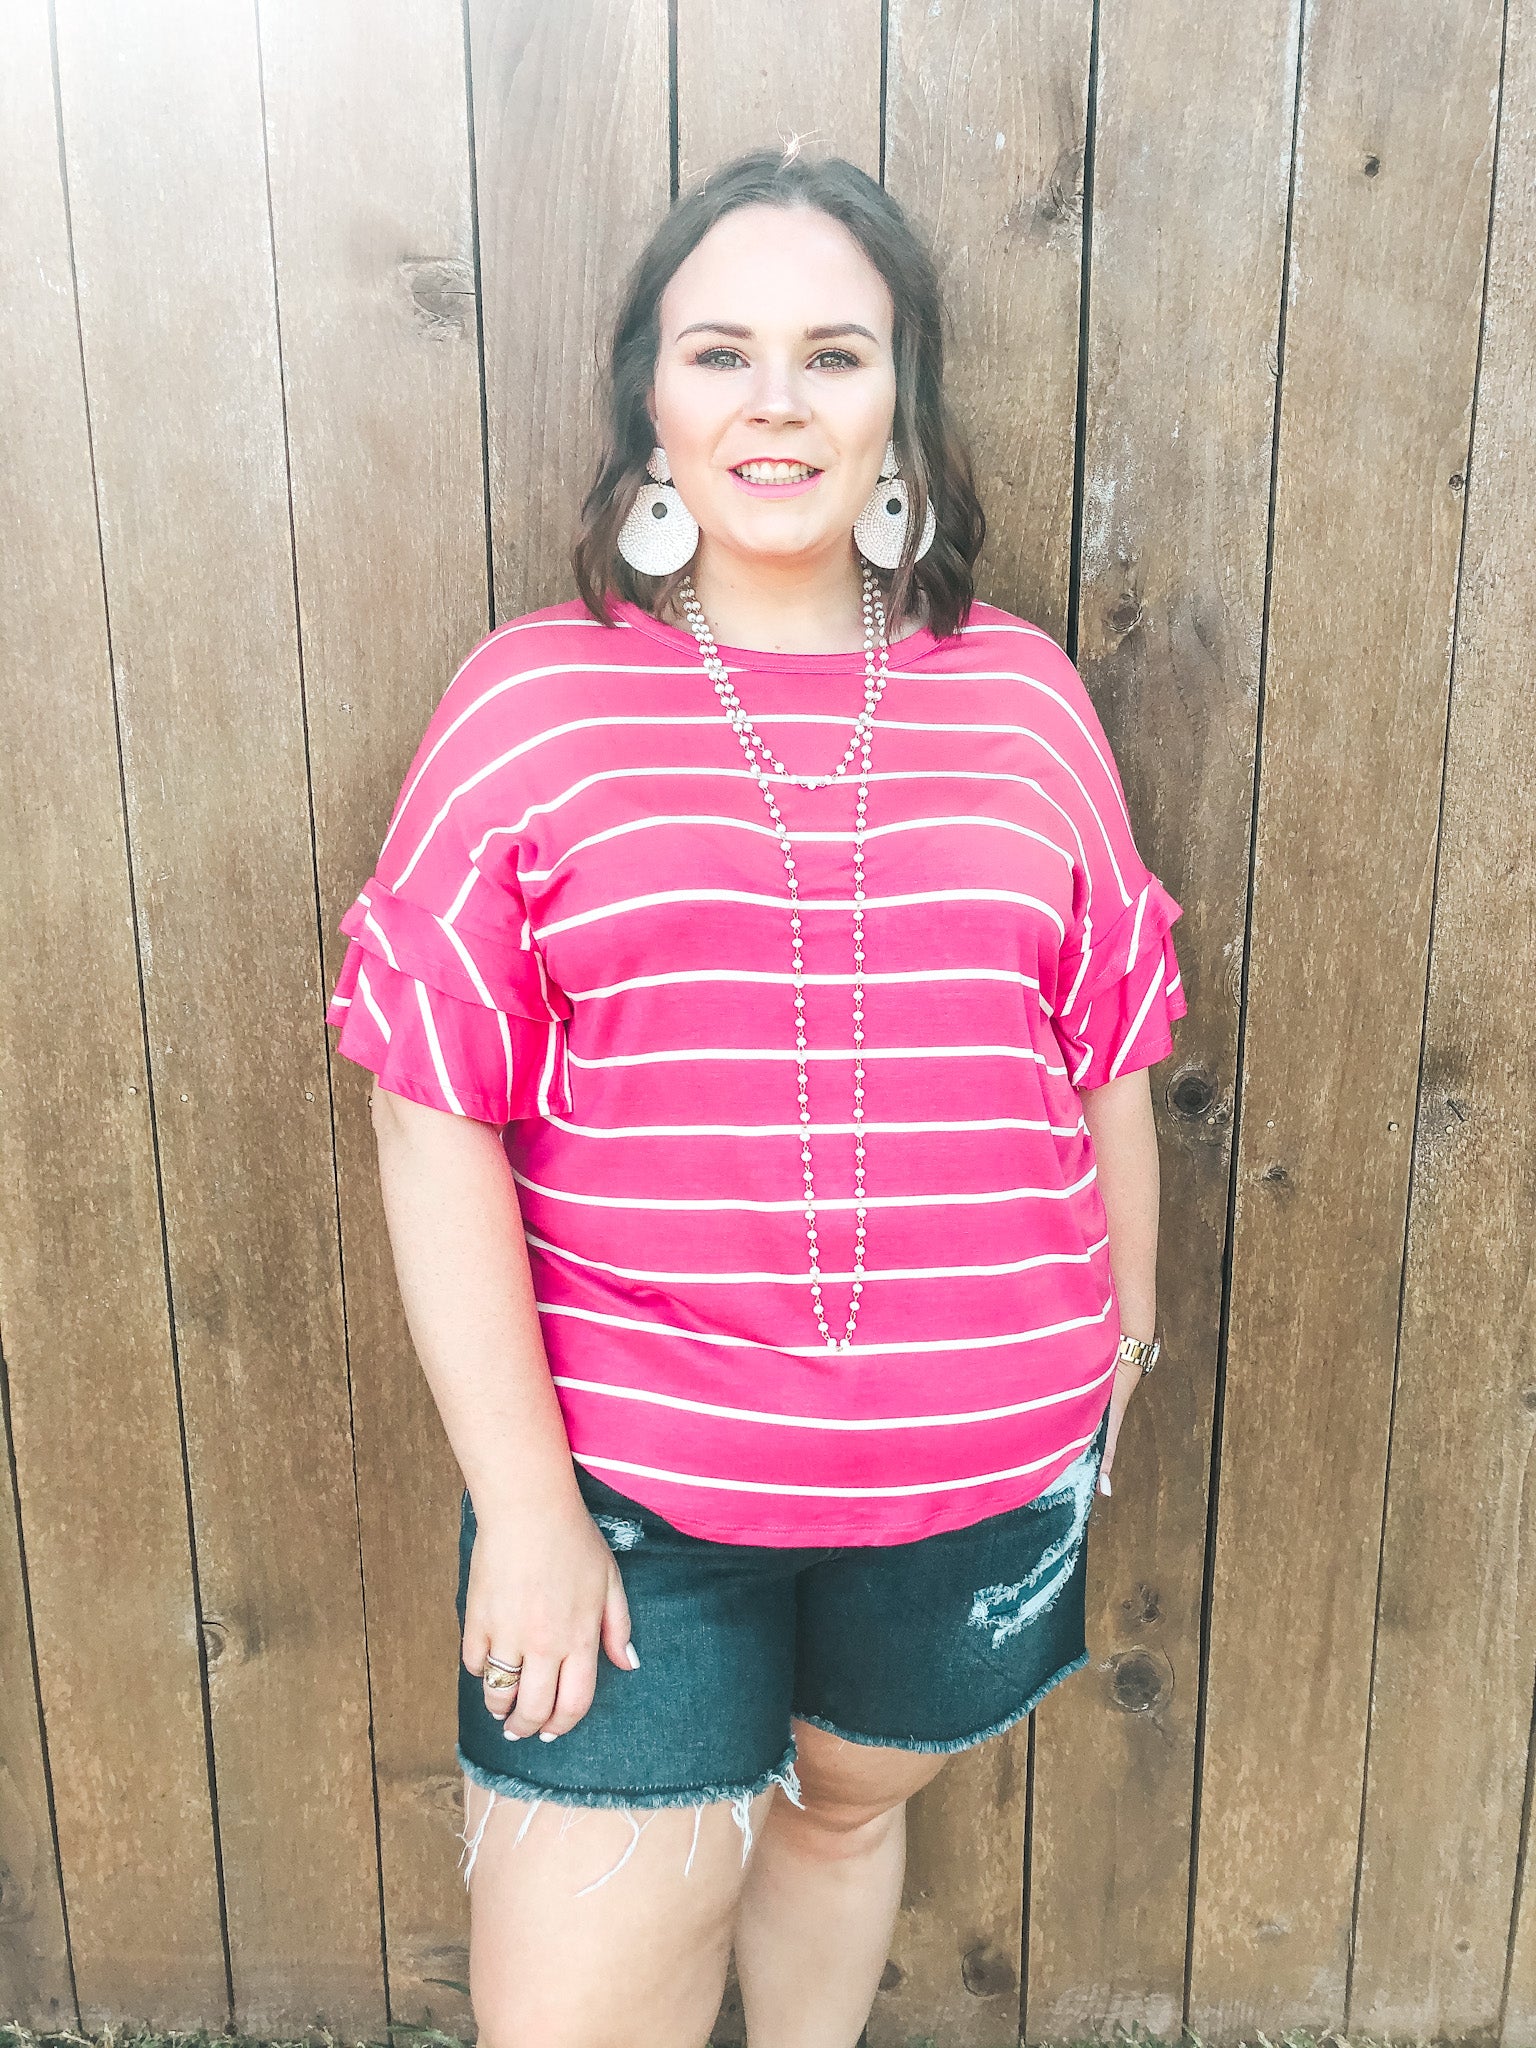 Set The Standard Short Sleeve with Ruffled Sleeves in Pink and Ivory Stripe - Giddy Up Glamour Boutique